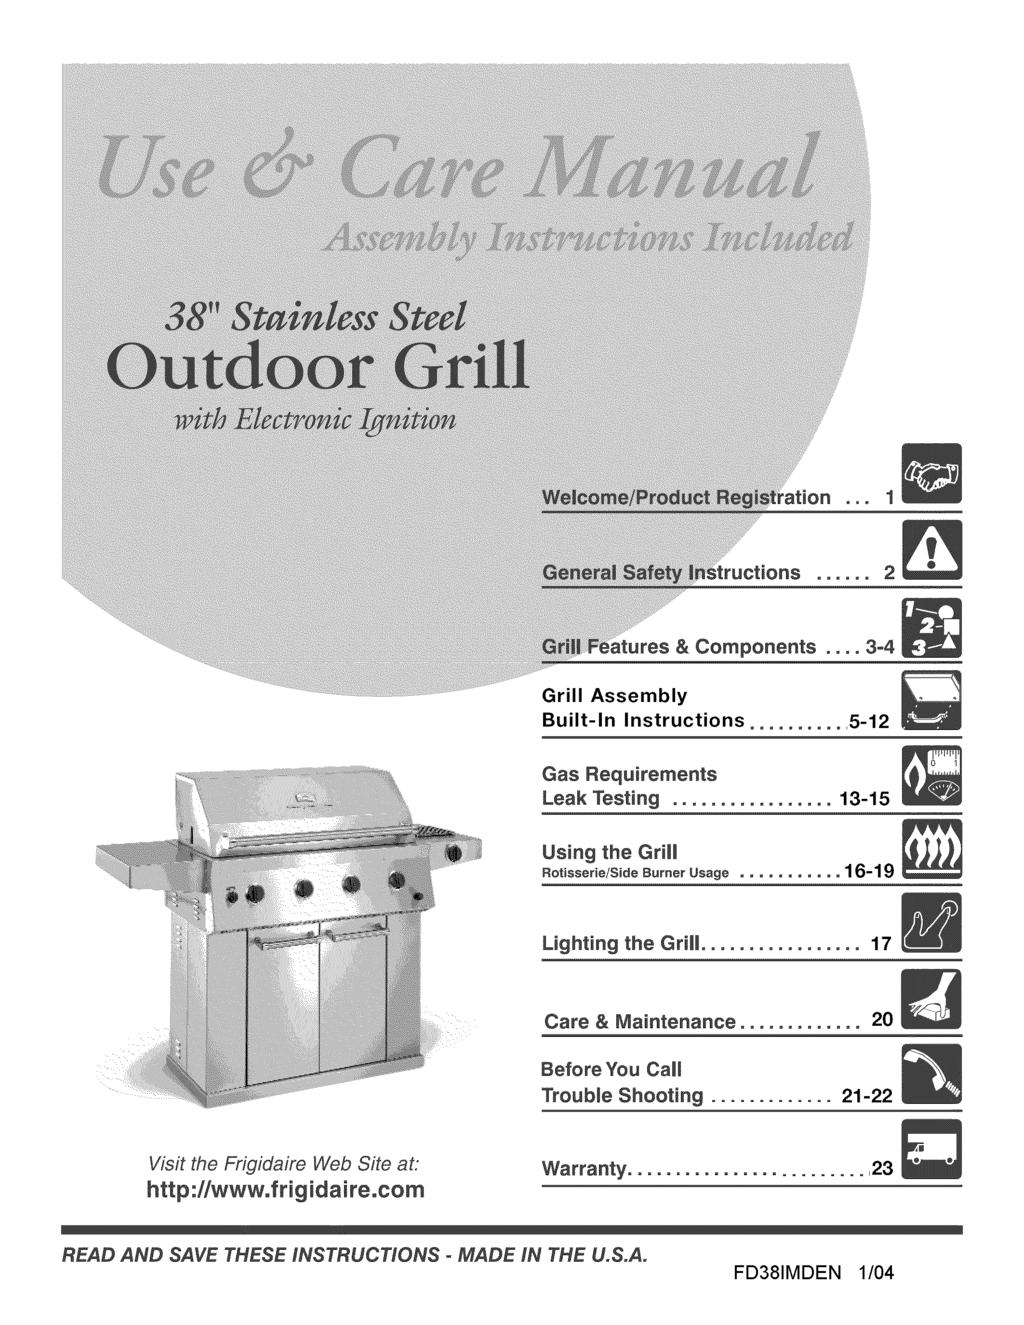 Grill Assembly Built-In Instructions 5-12 Gas Requirements Leak Testing 13-15 Using the Grill Rotisserie/Side Burner Usage 16-19 Lighting the Grill 17 Care & Maintenance 20